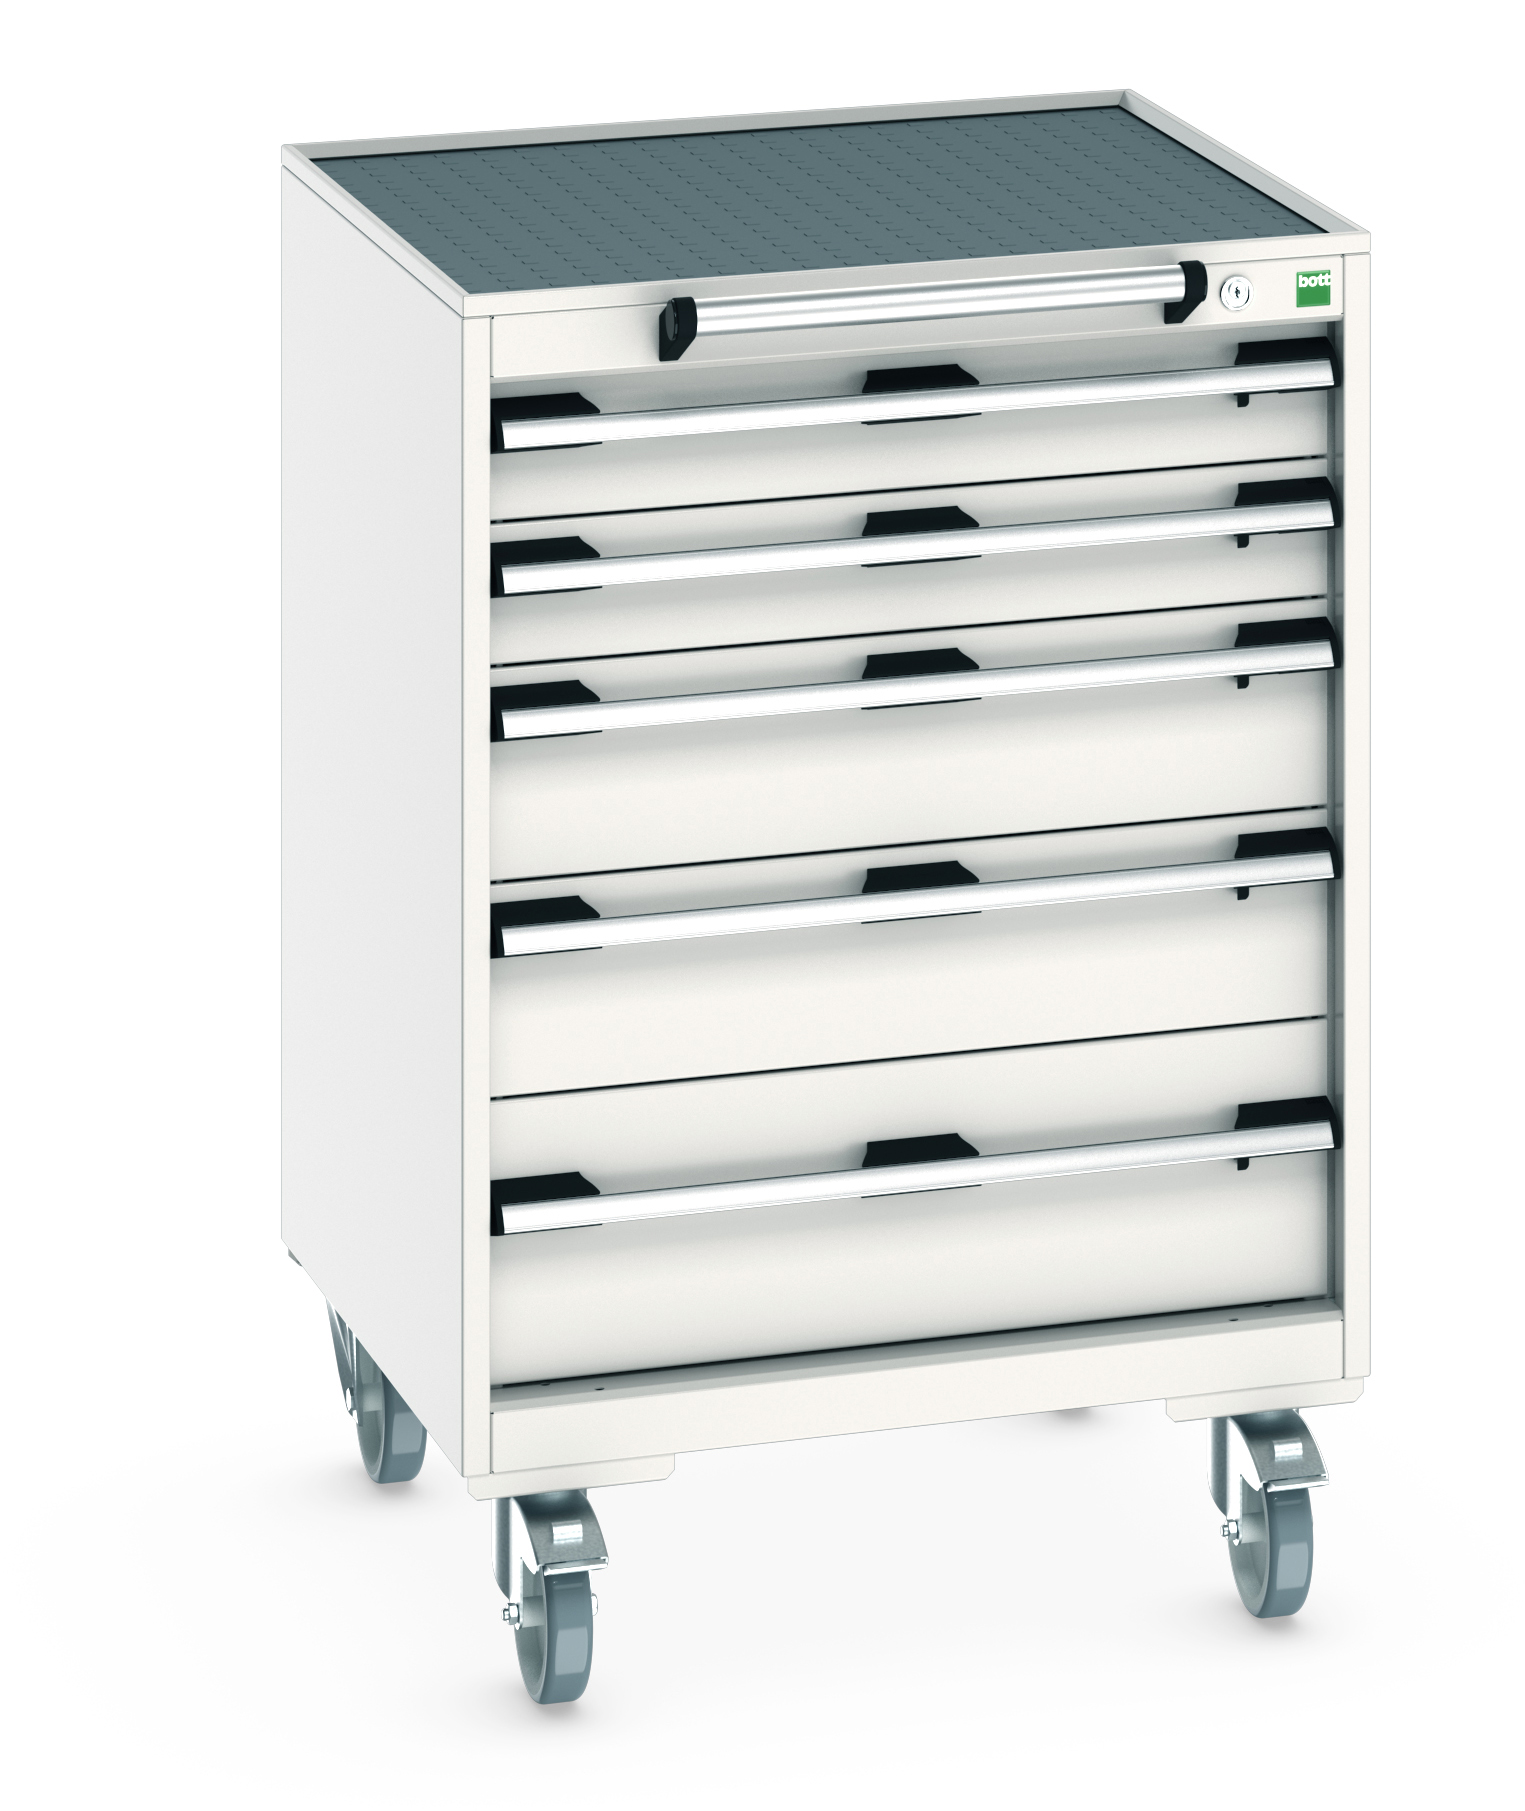 Bott Cubio Mobile Drawer Cabinet With 5 Drawers & Top Tray With Mat - 40402033.16V